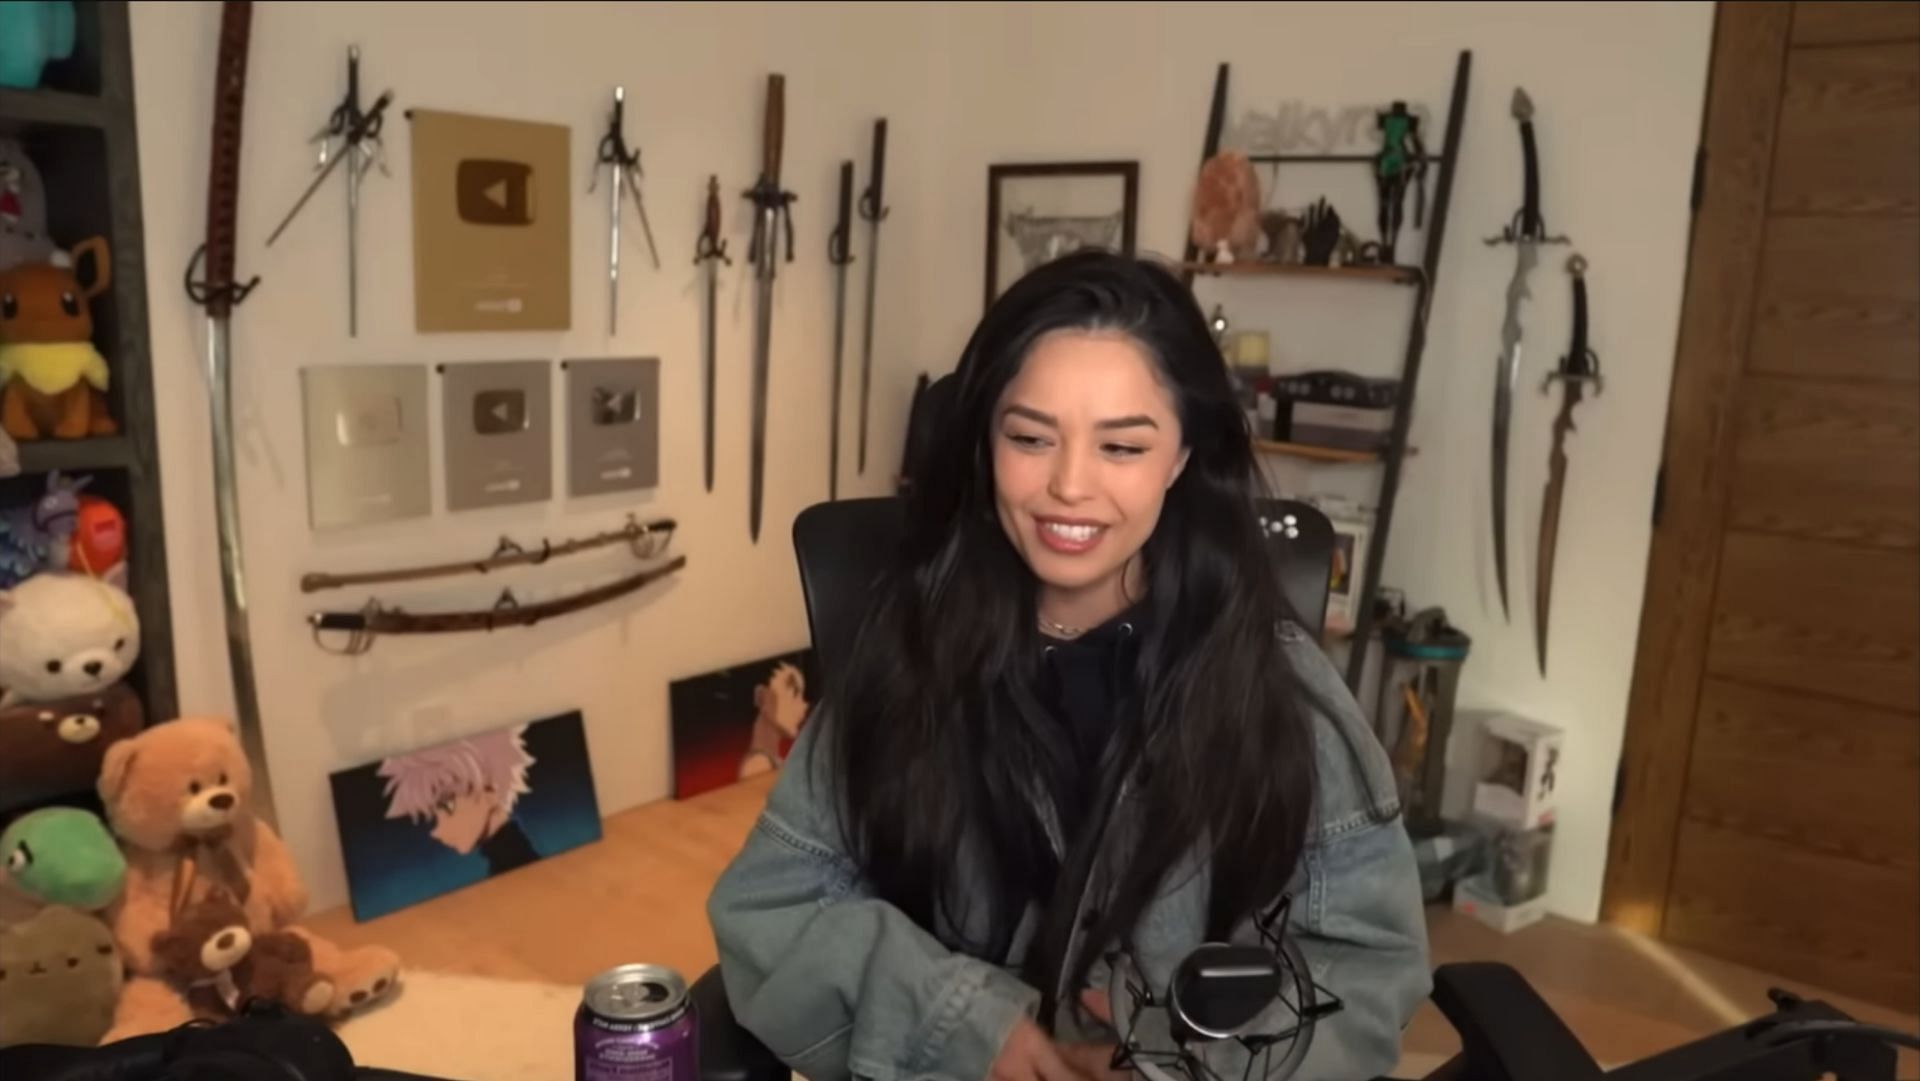 Valkyrae received some backlash about wearing a Fortnite x Balenciaga hoodie during her stream.